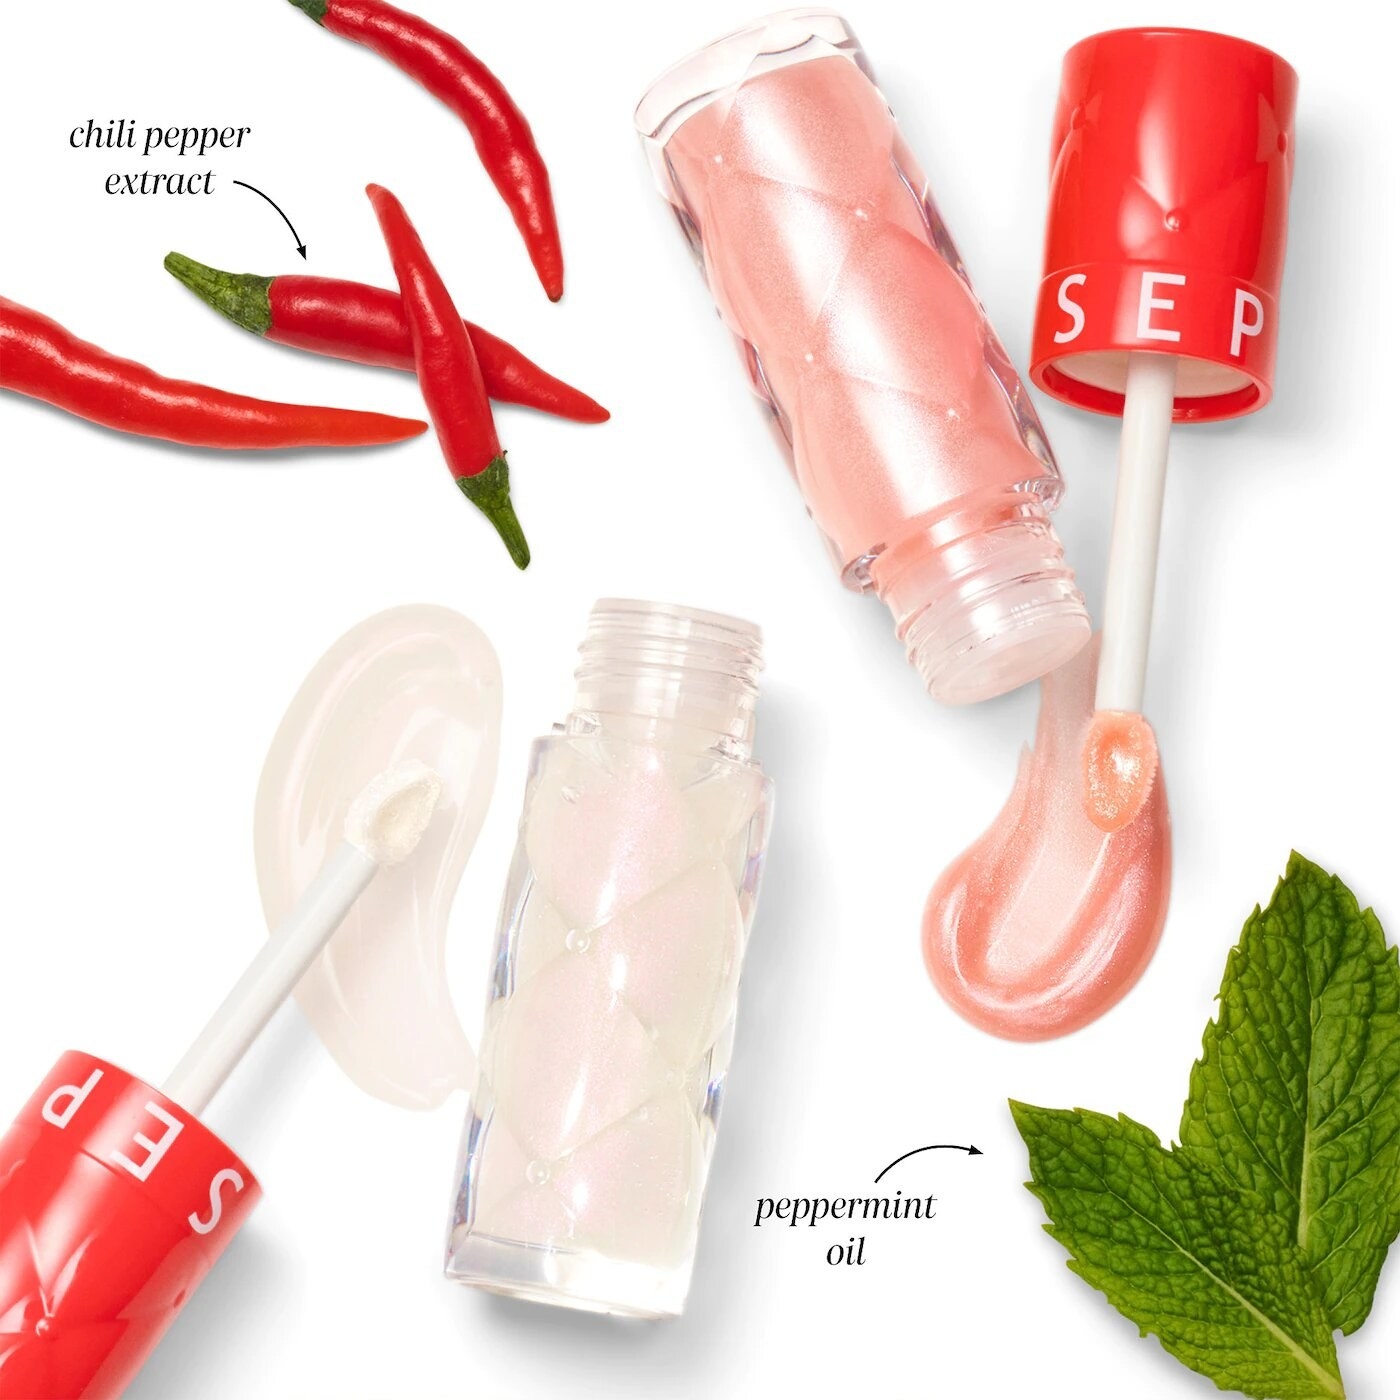 both shades of the lip glosses open with swatches beside peppermint leaves and chili peppers